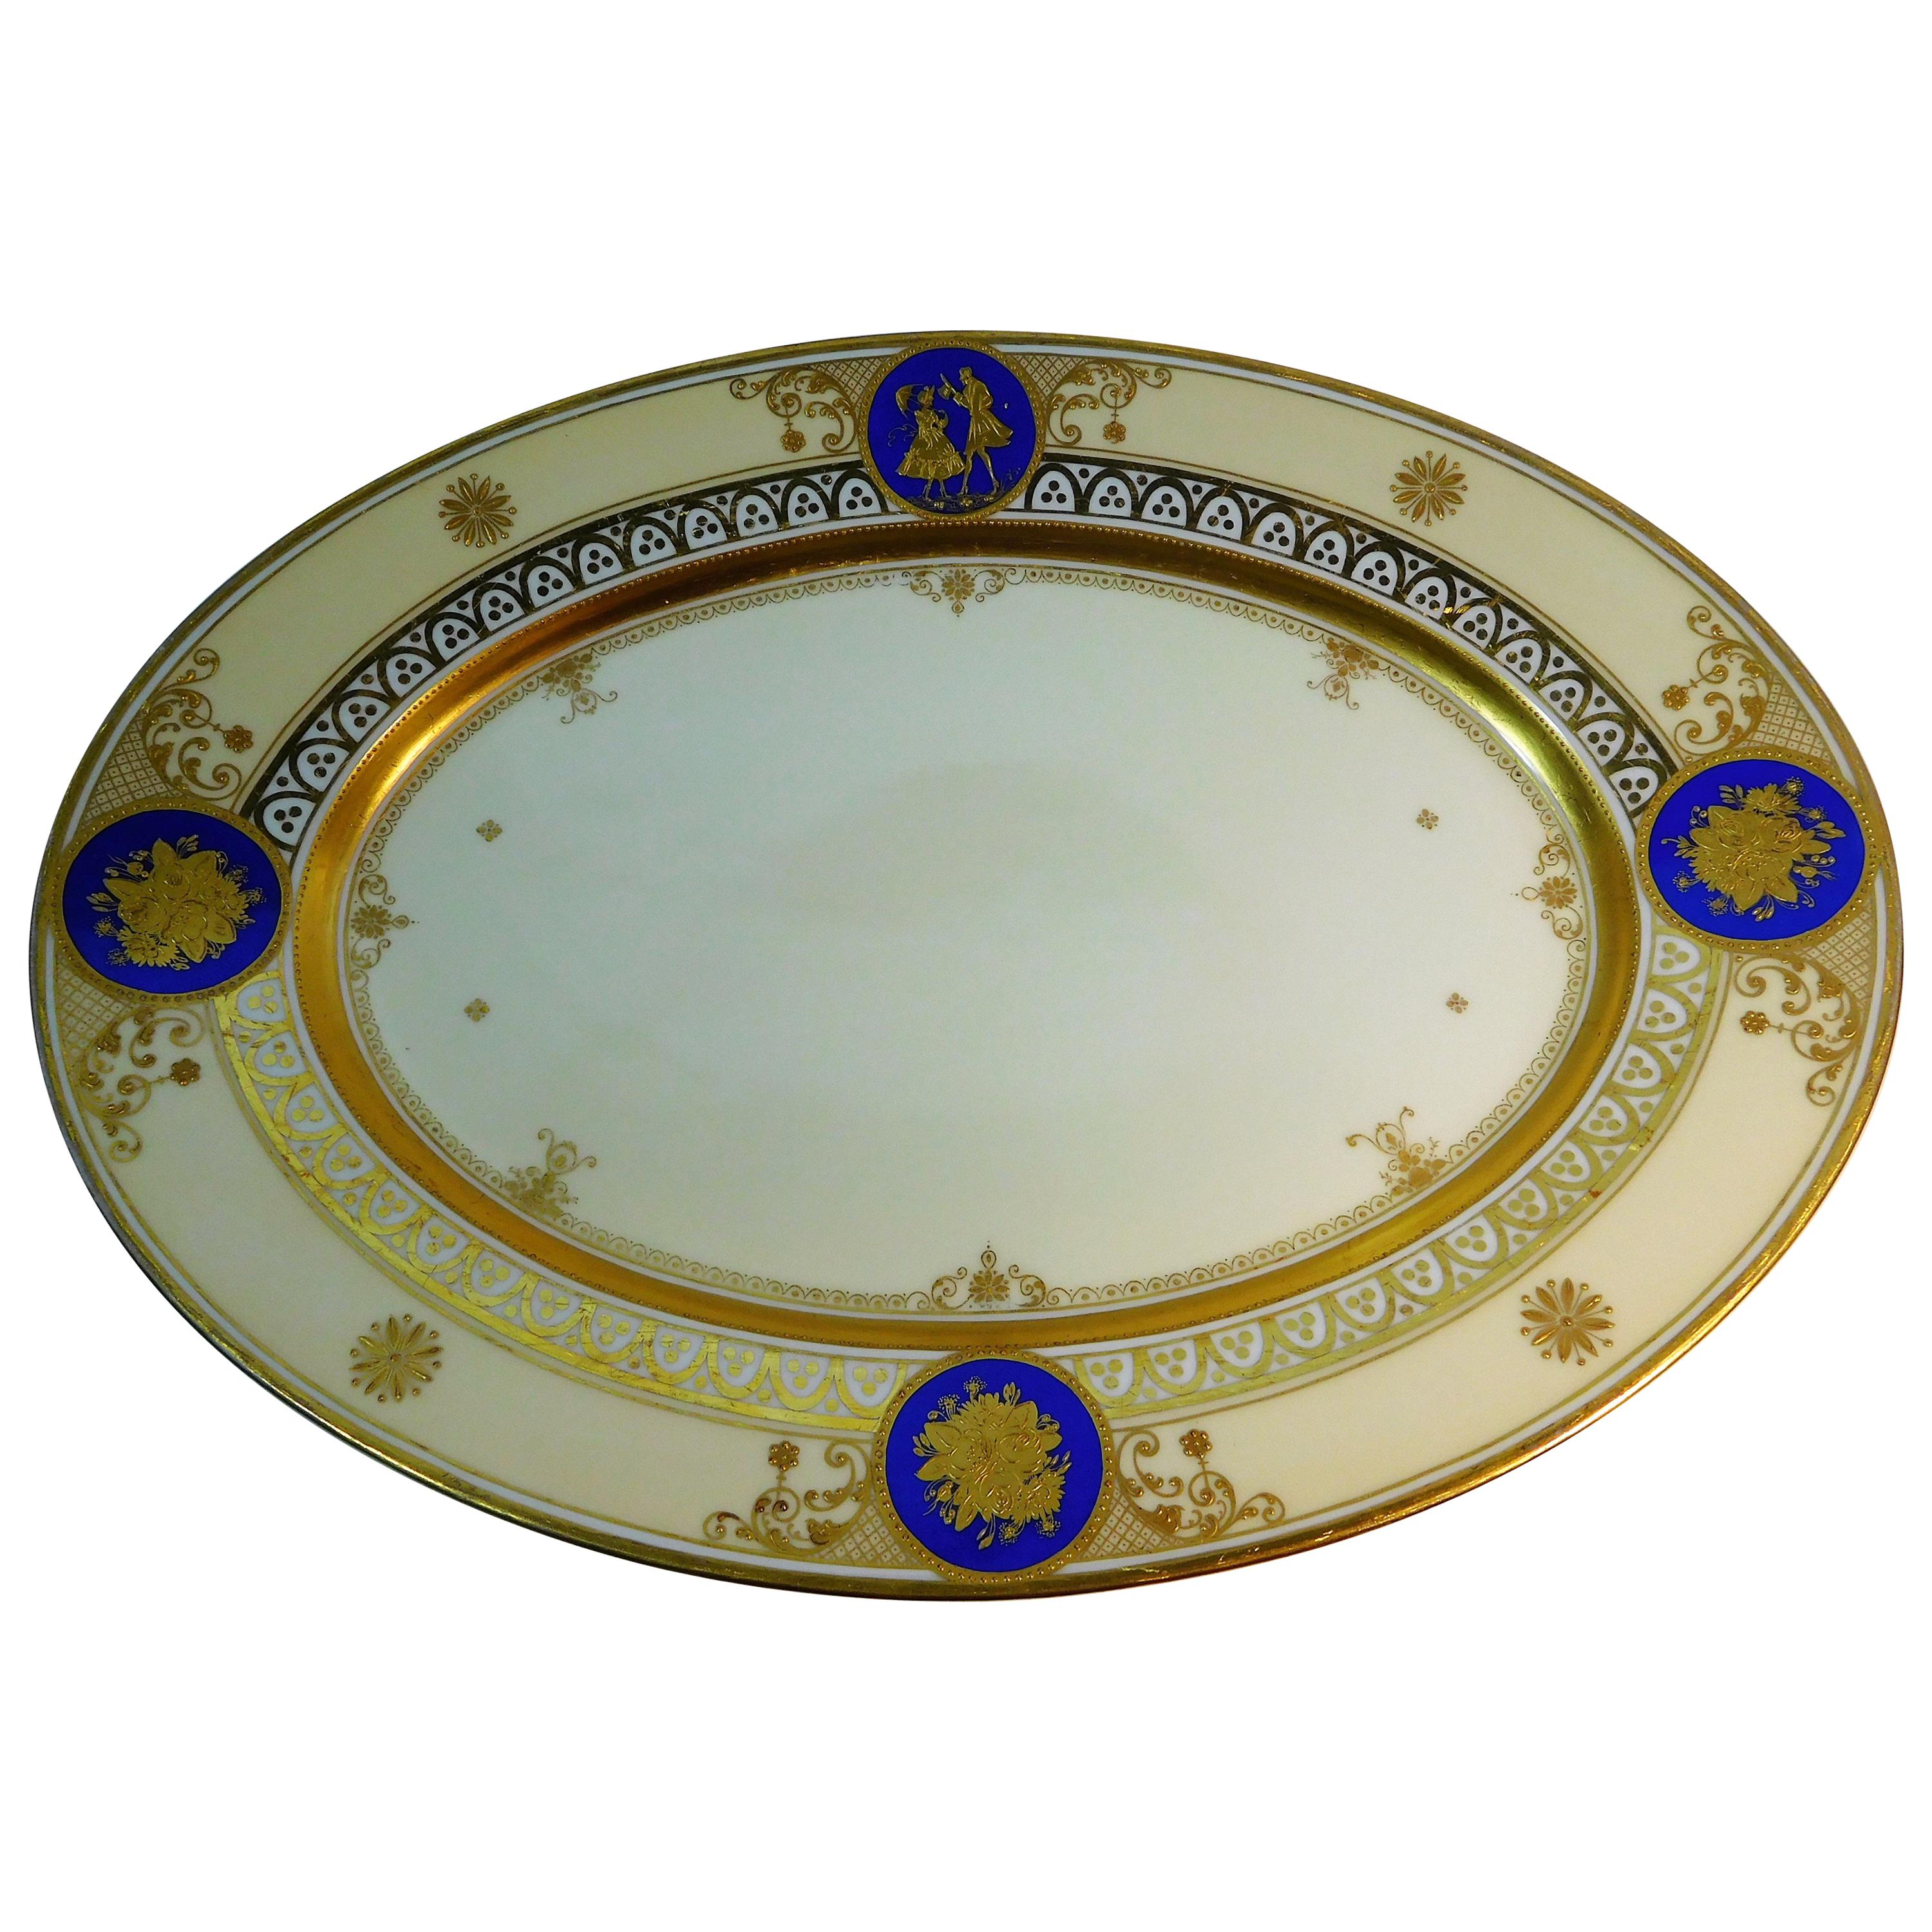 Dresden Porcelain Platter with Gold Incrustation by Ambrosius Lamm, circa 1900